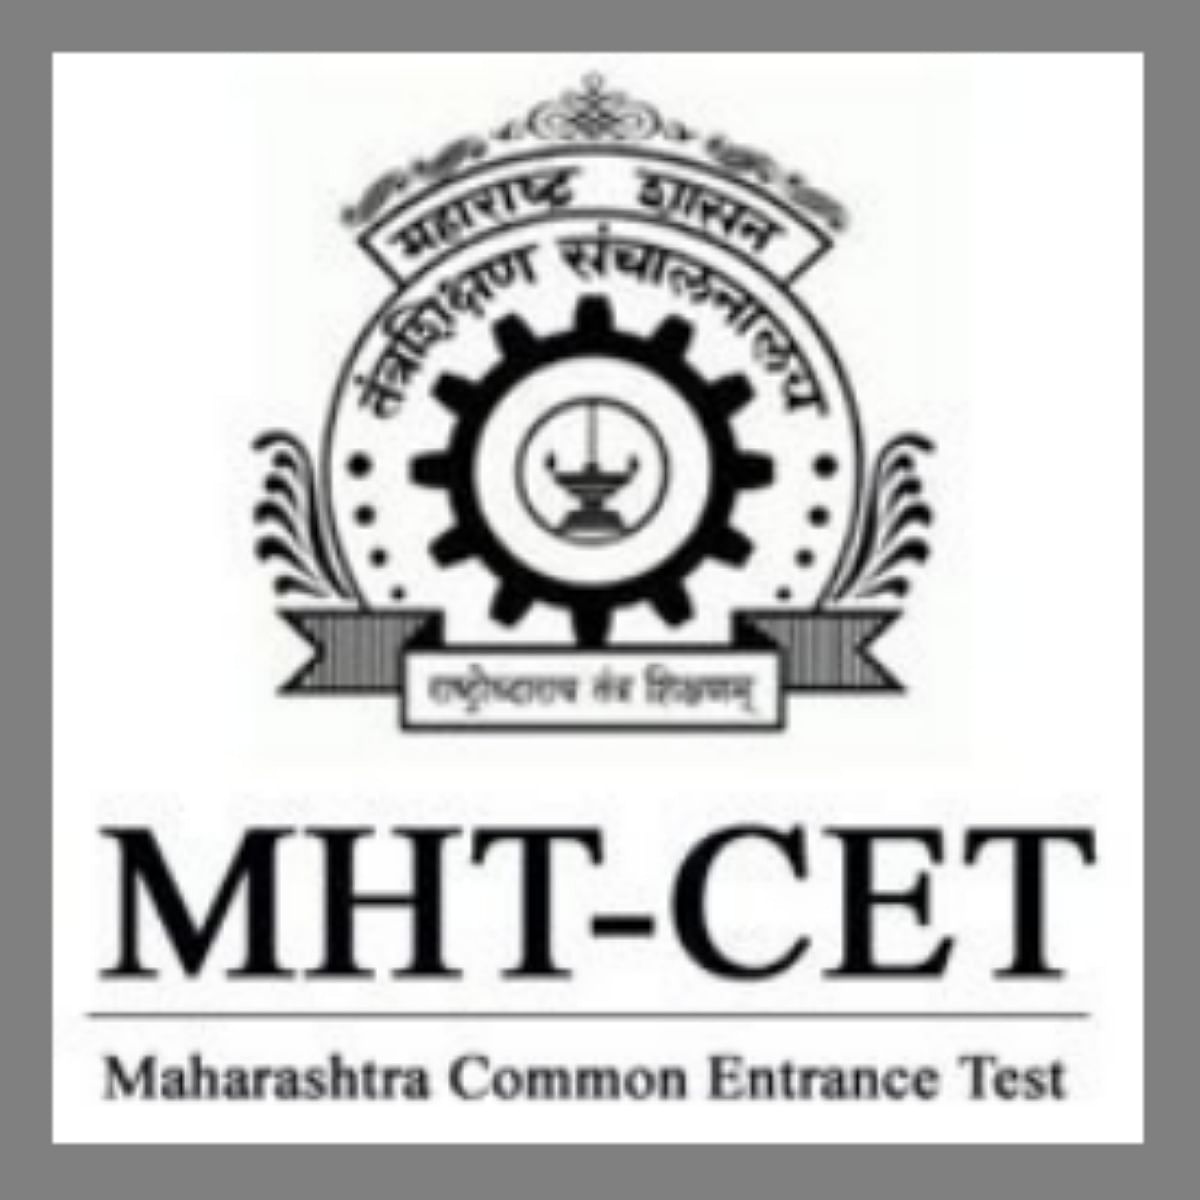 MHT CET UG Exam Dates Likely to be Announced Around May 15, Maharashtra HSC Results 2020 Expected in June